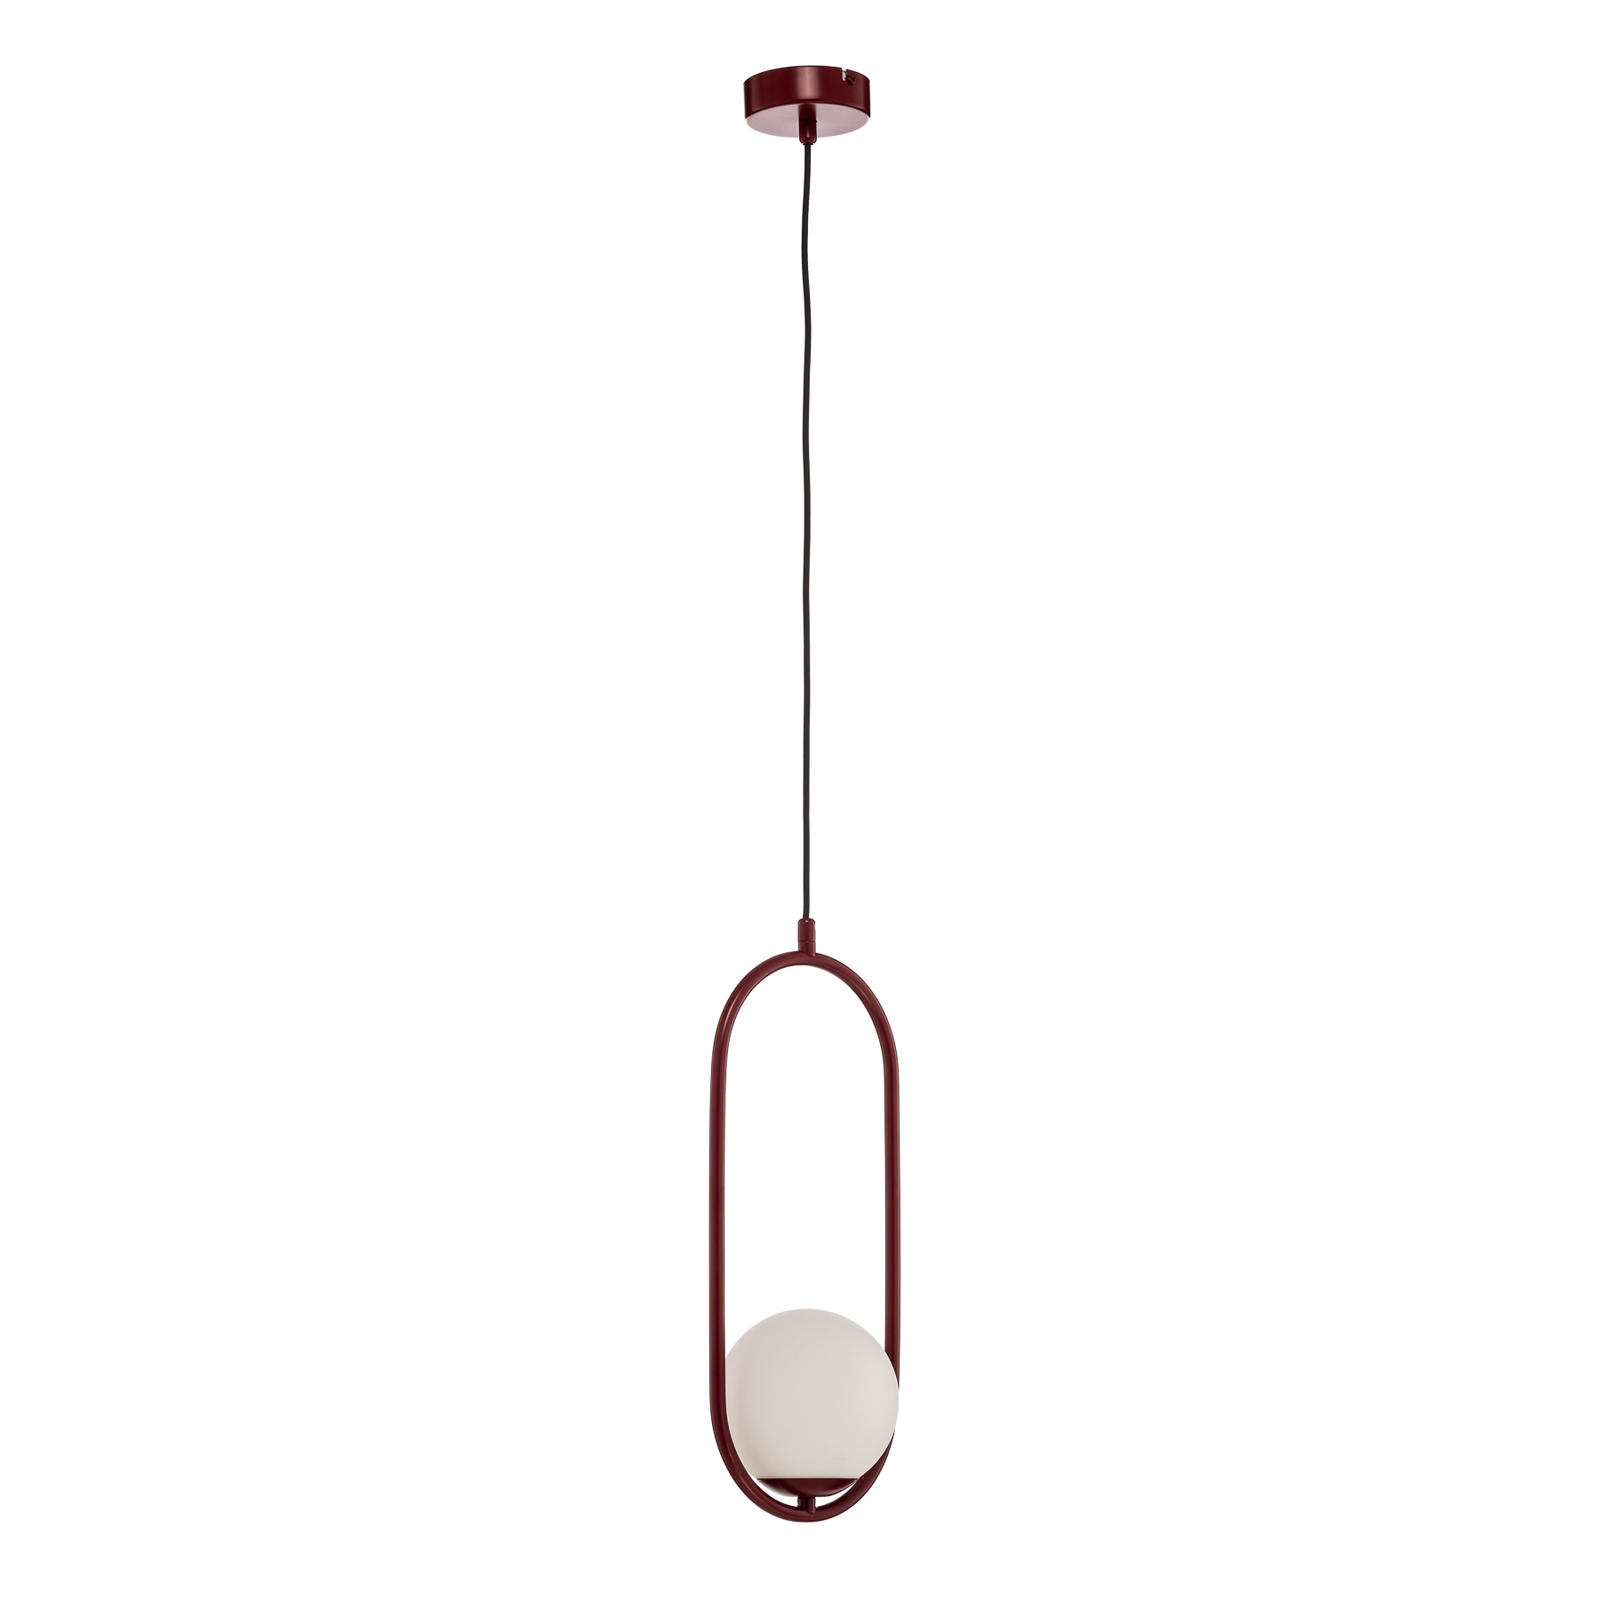 Hanglamp Dione, 1-lamp, wijnrood/wit